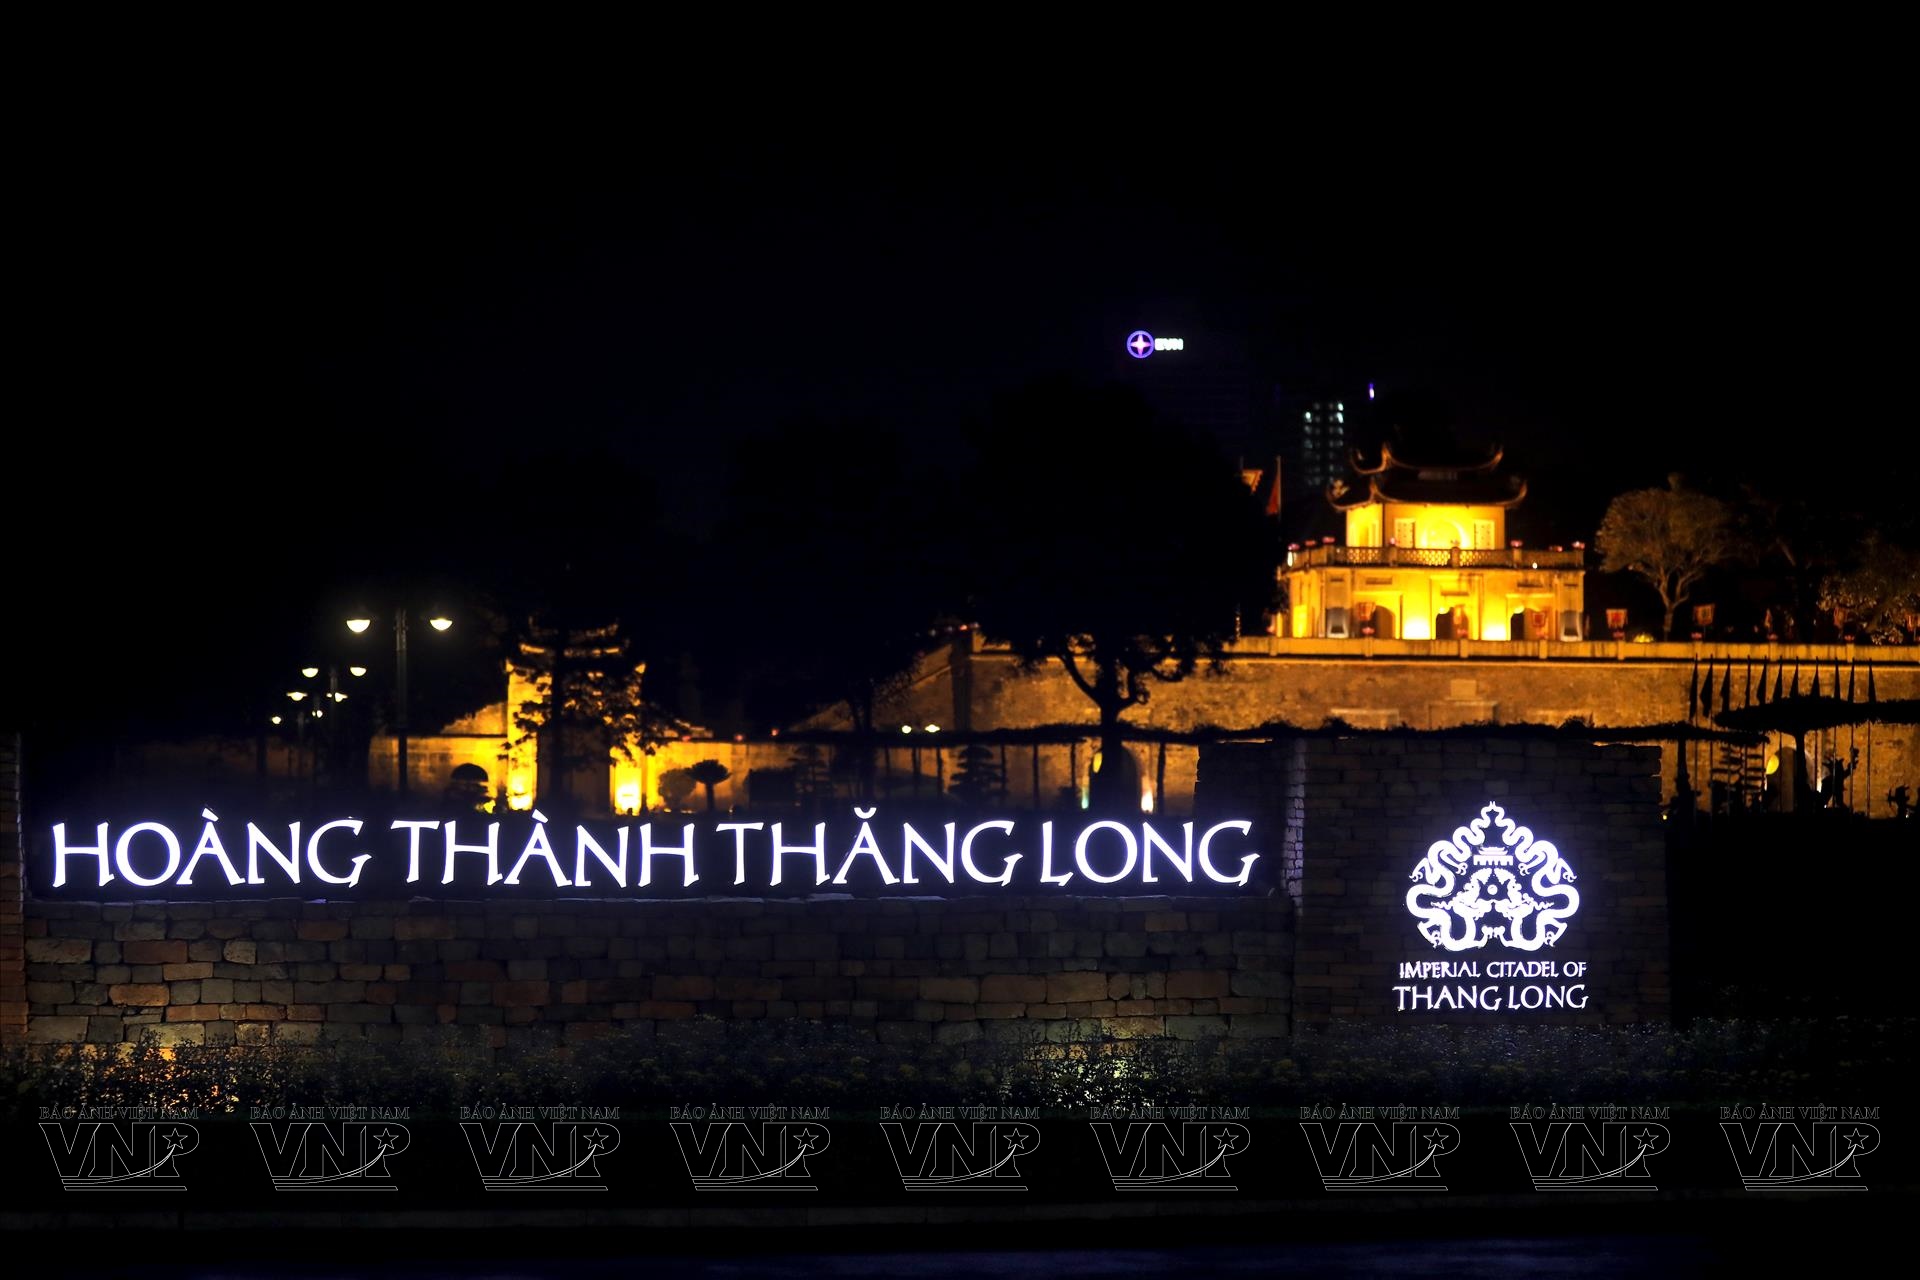 The name of the land of Thang Long through historical periods